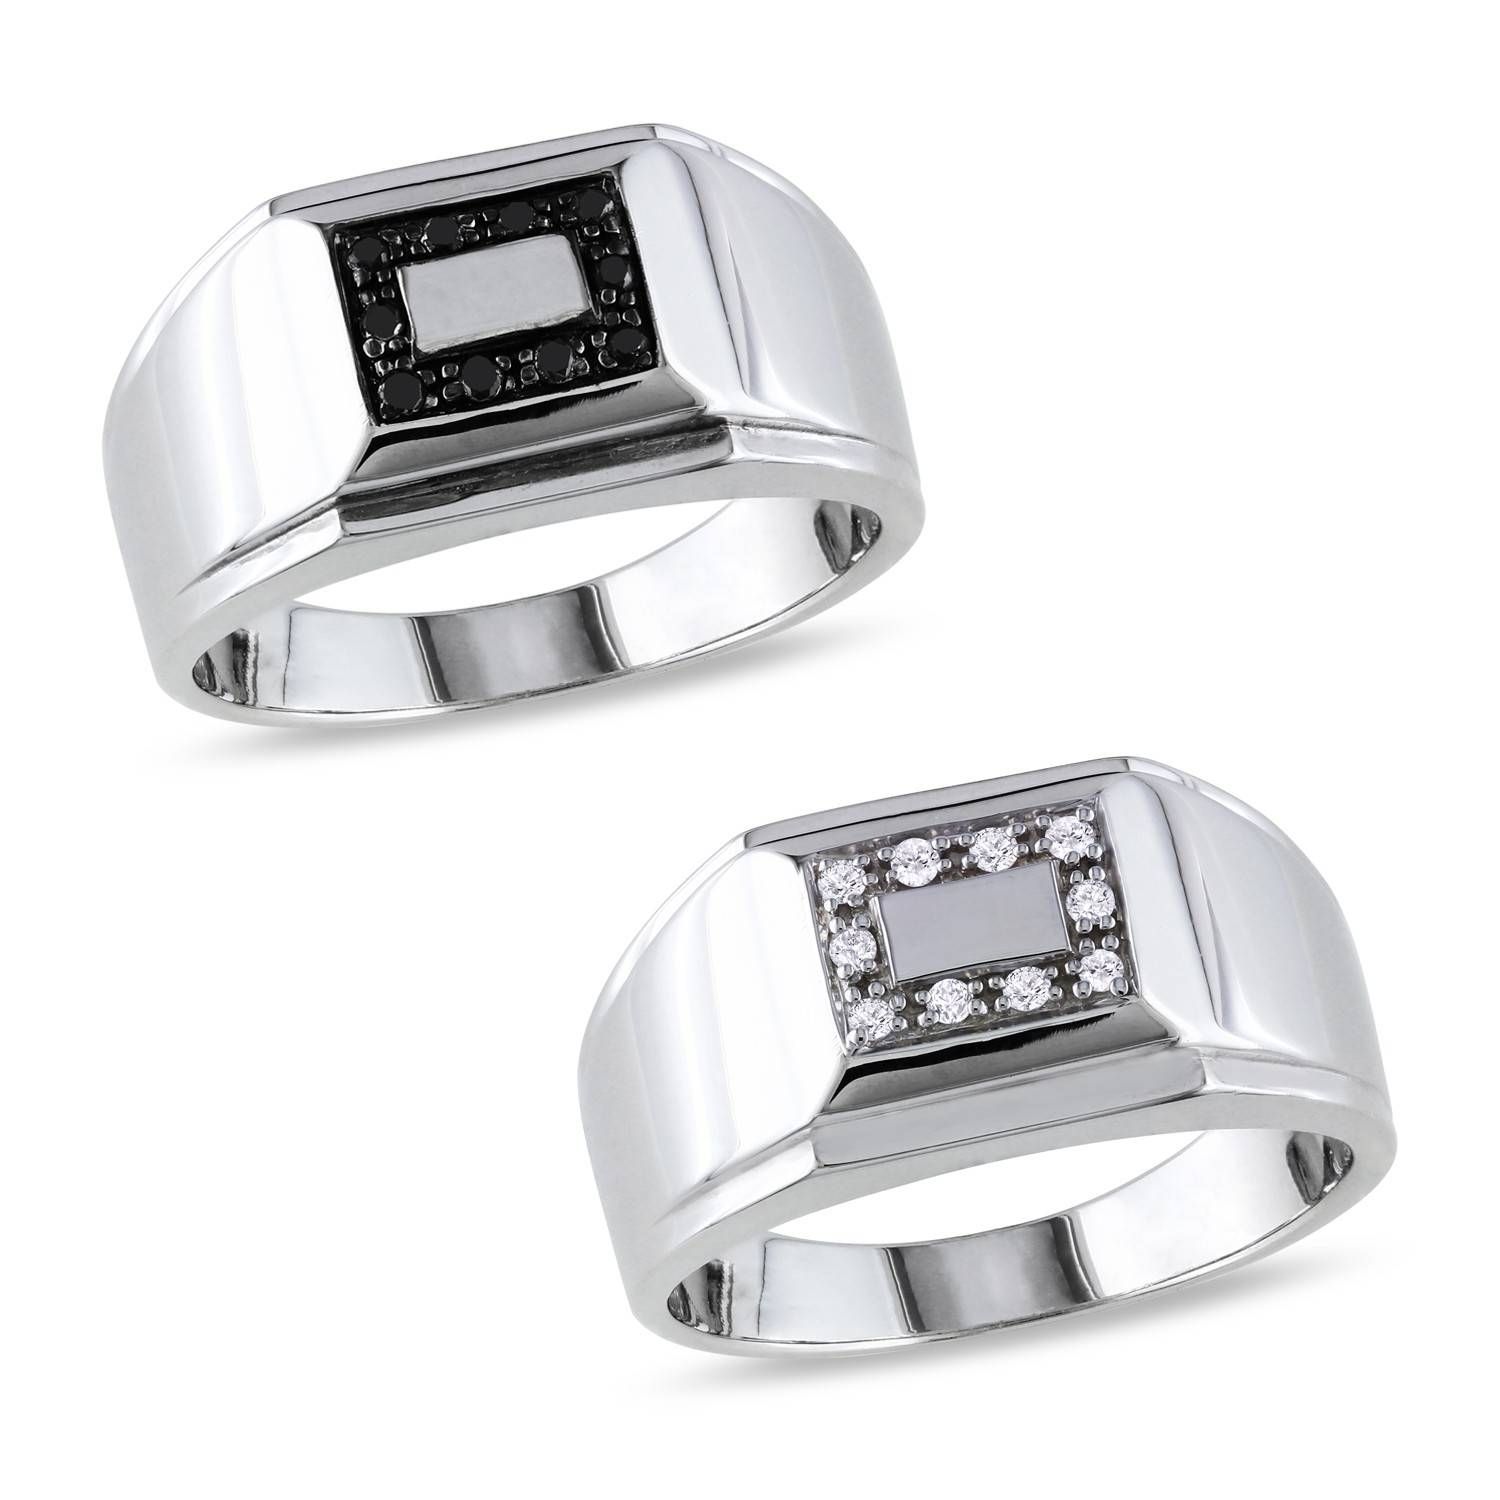 Mens Wedding Rings With Diamonds Platinum Inspirational Mens Pertaining To Overstock Mens Wedding Bands (View 4 of 15)